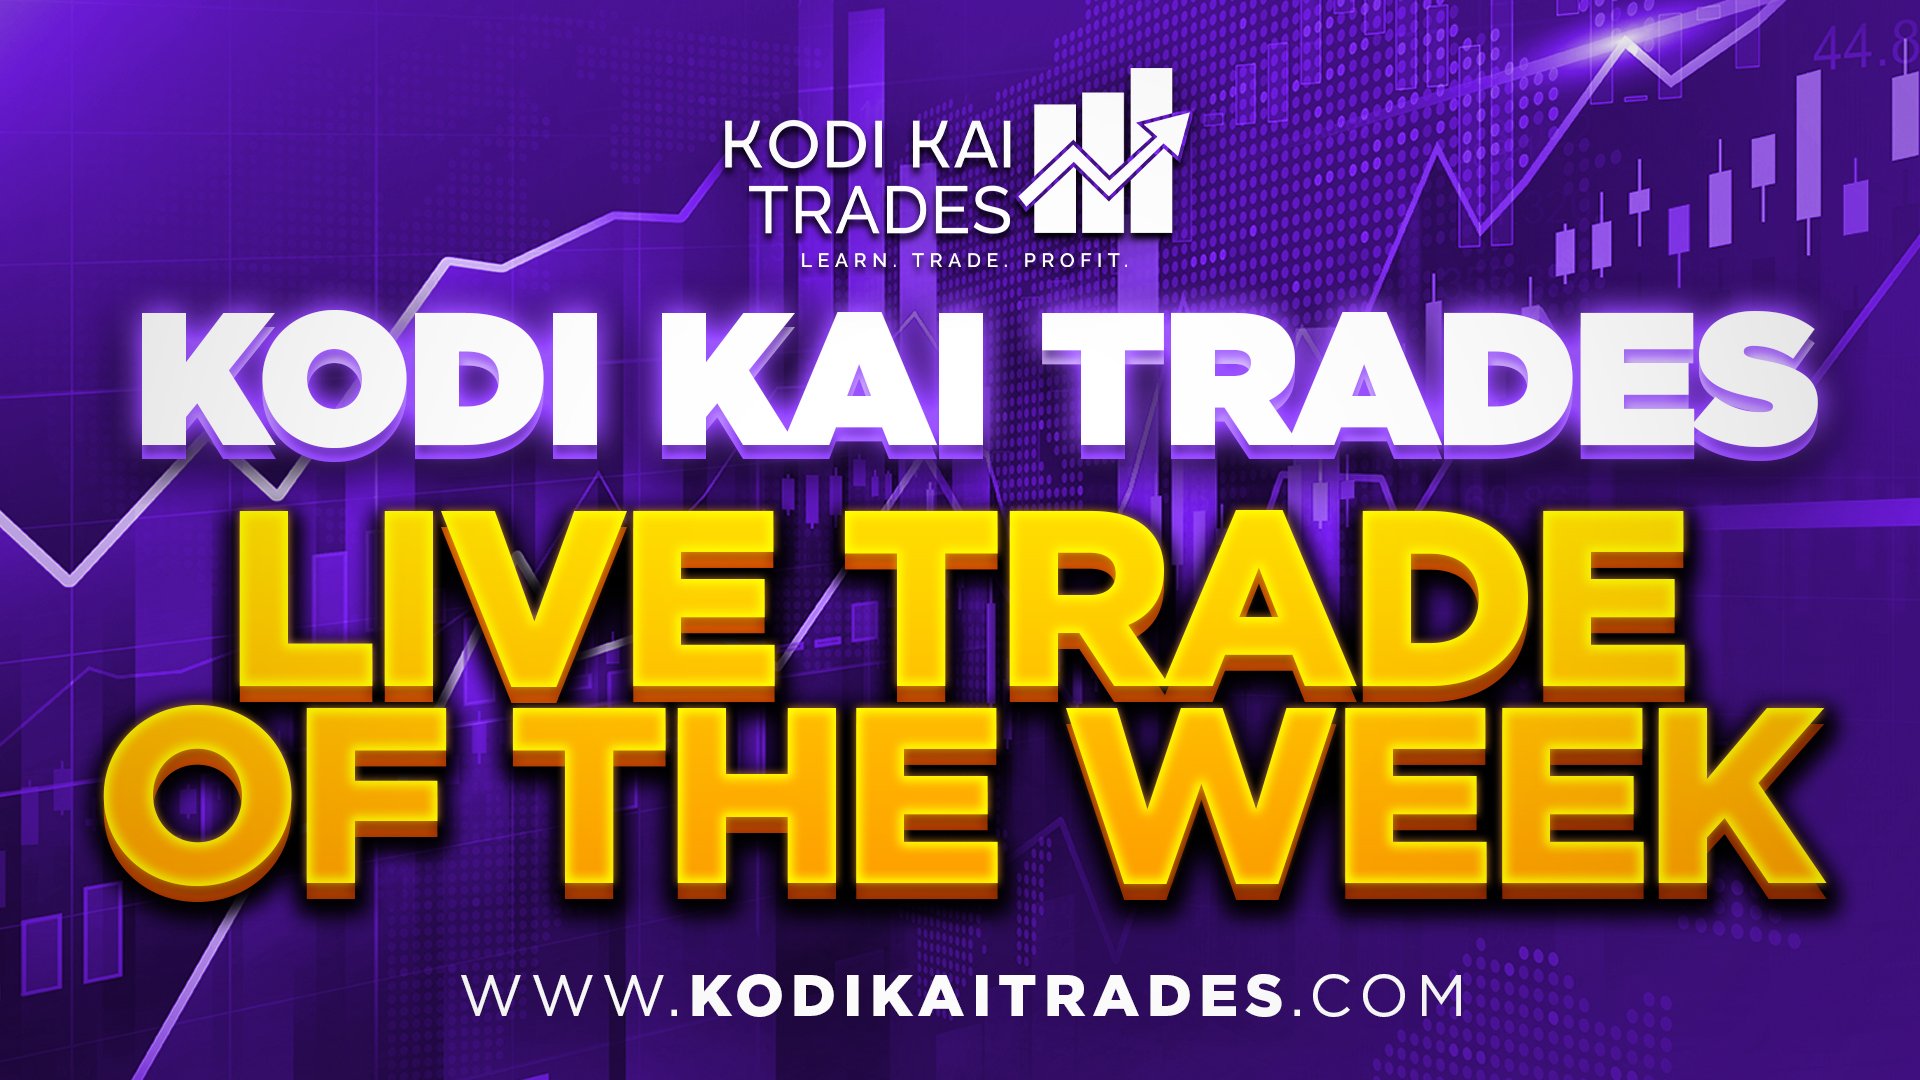 Live Trade Of The Week